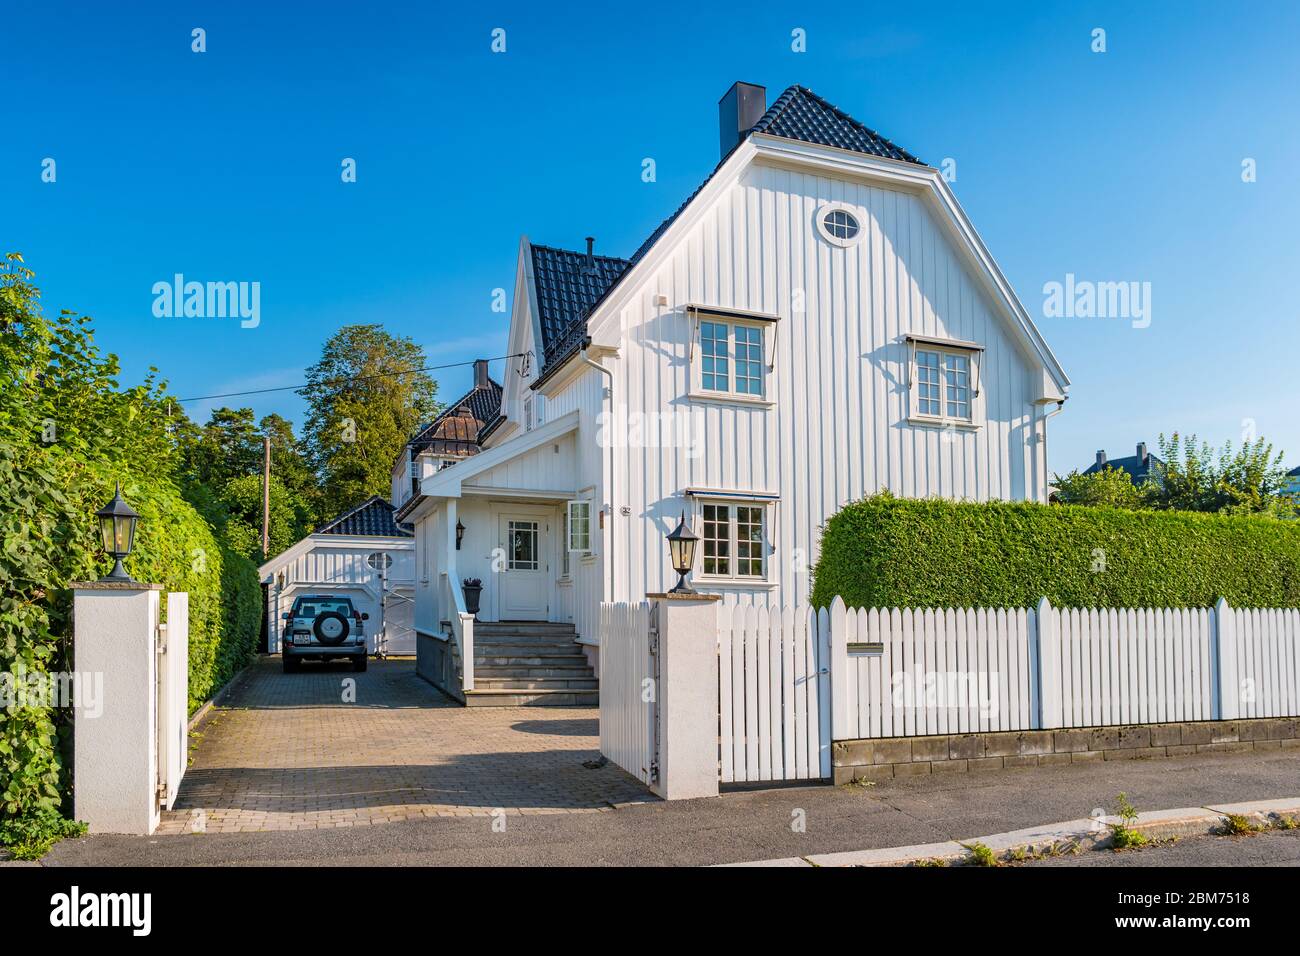 Typical detached house in Oslo Norway Stock Photo - Alamy